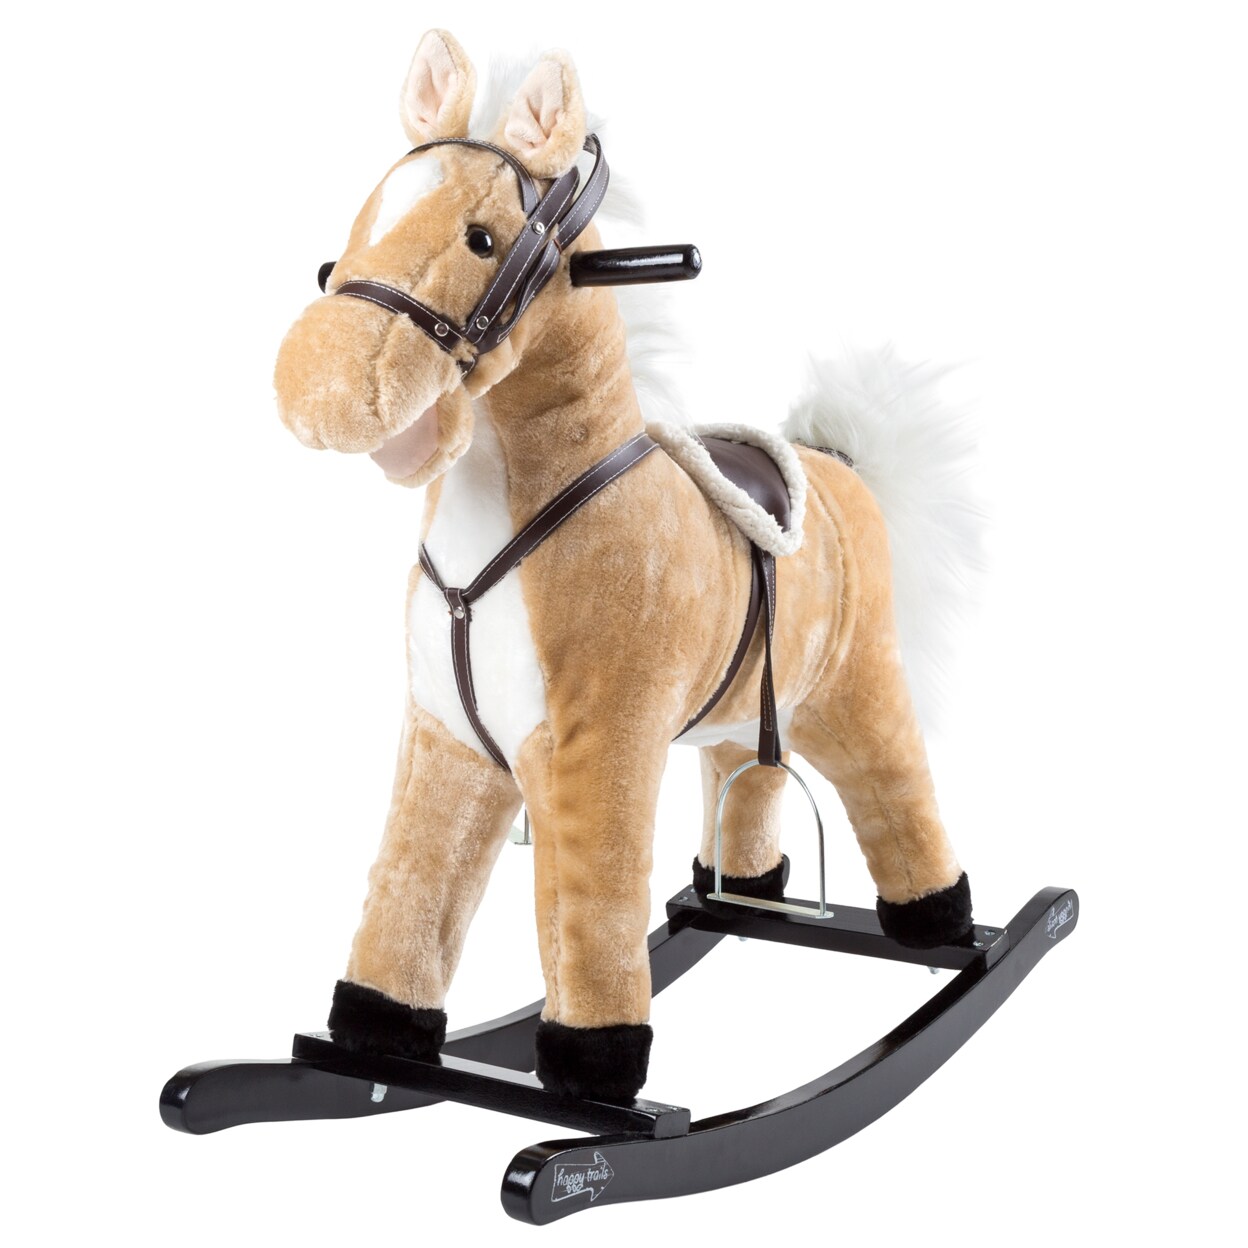 Happy Trails   Rocking Horse Toddler to 4 Yrs Wooden Rocker Stuffed Animal Noise Saddle Reins Ride on Toy